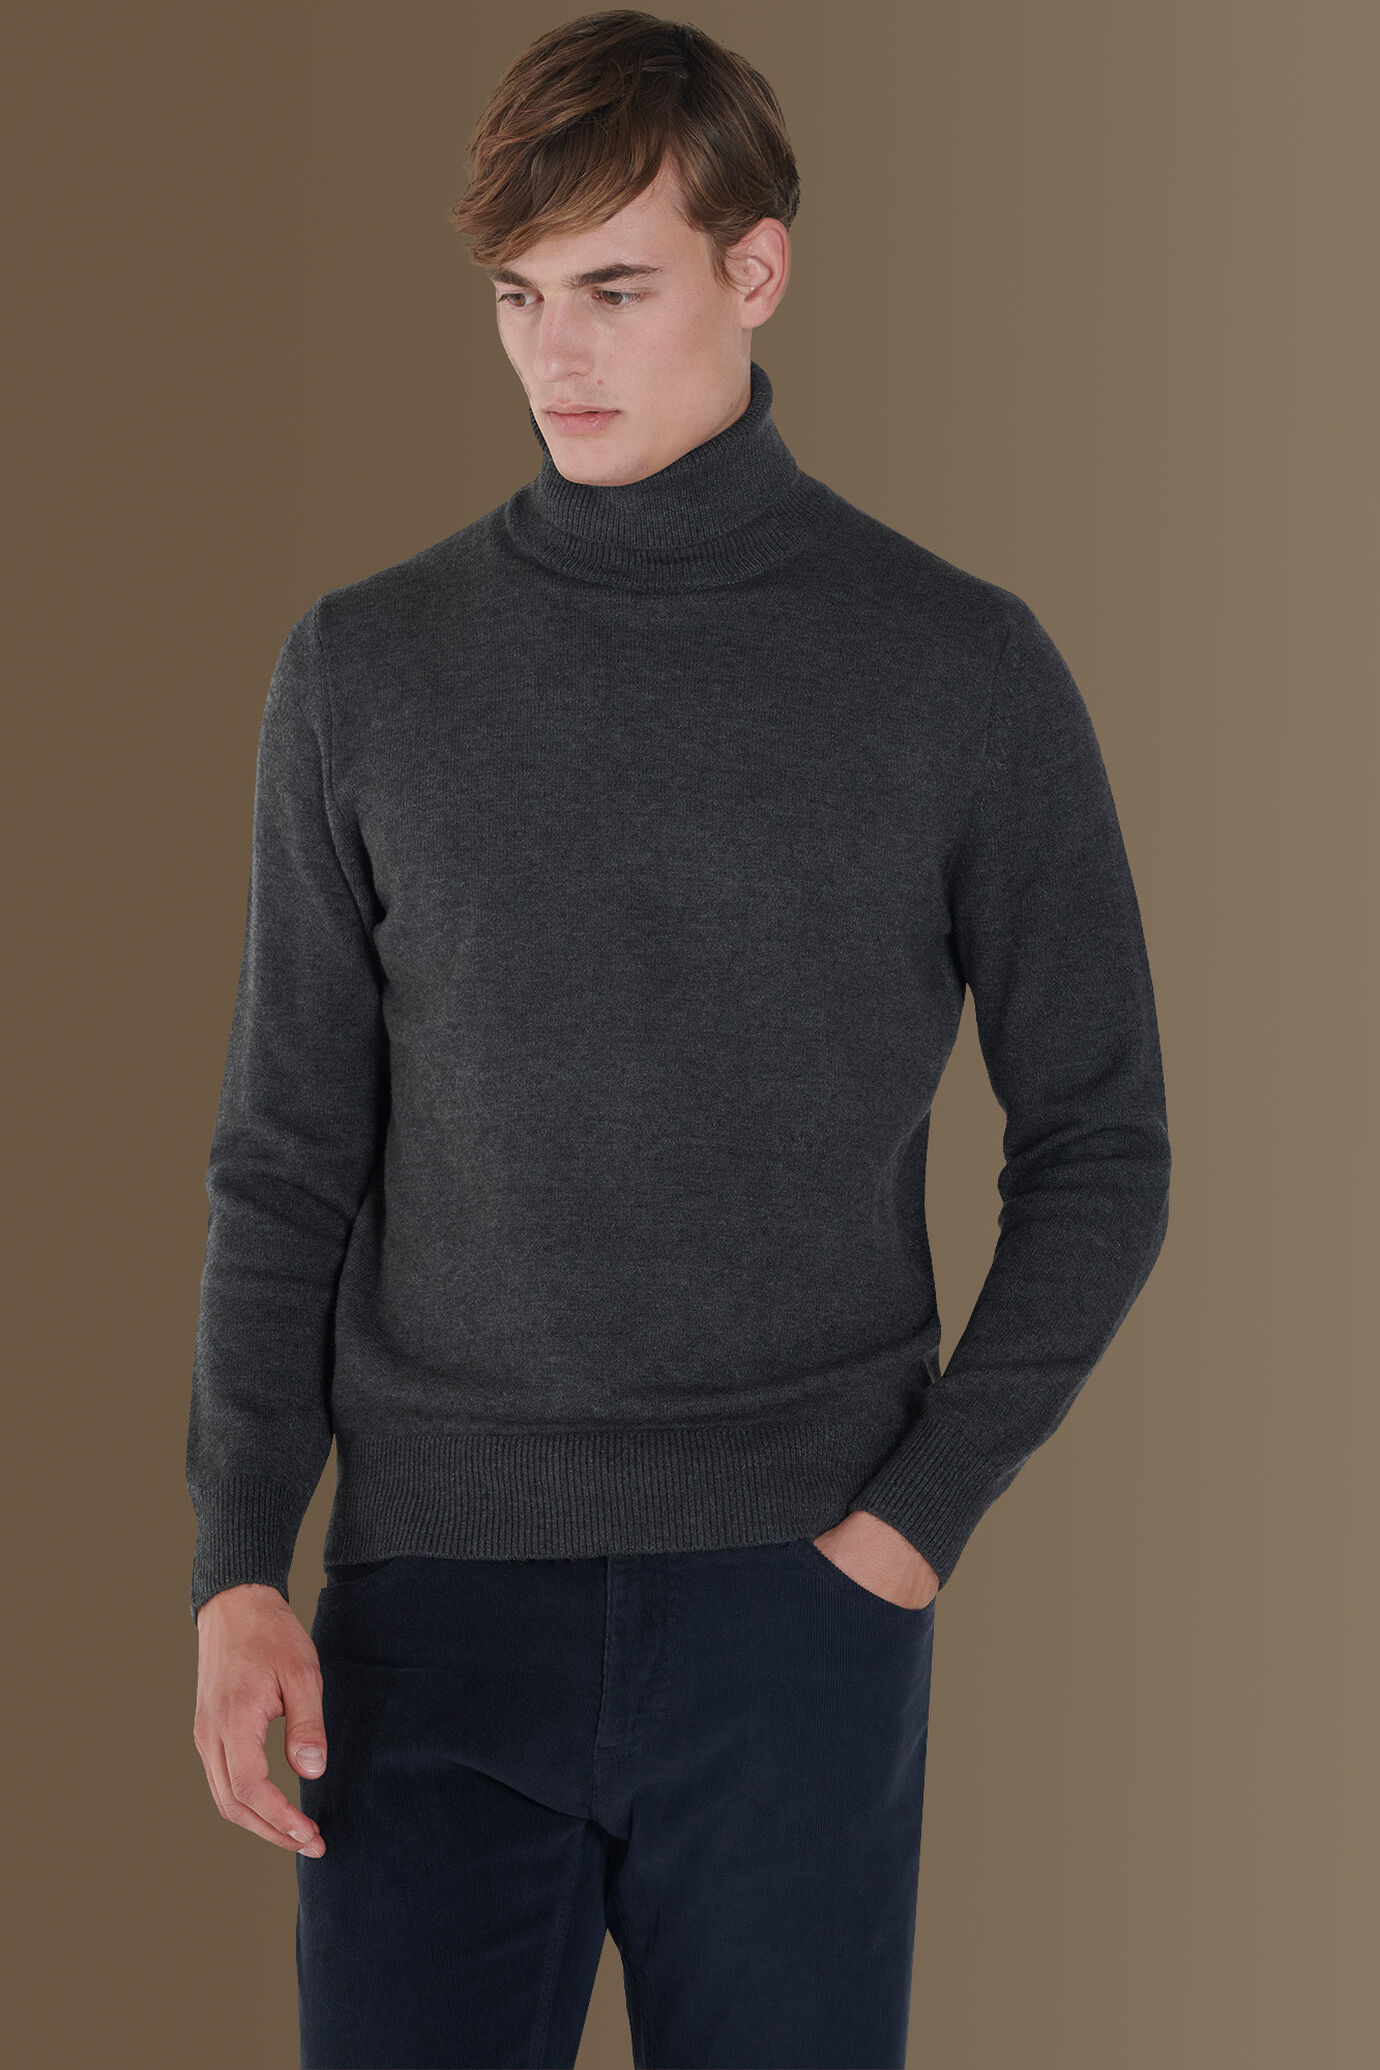 Turtleneck sweater soft touch